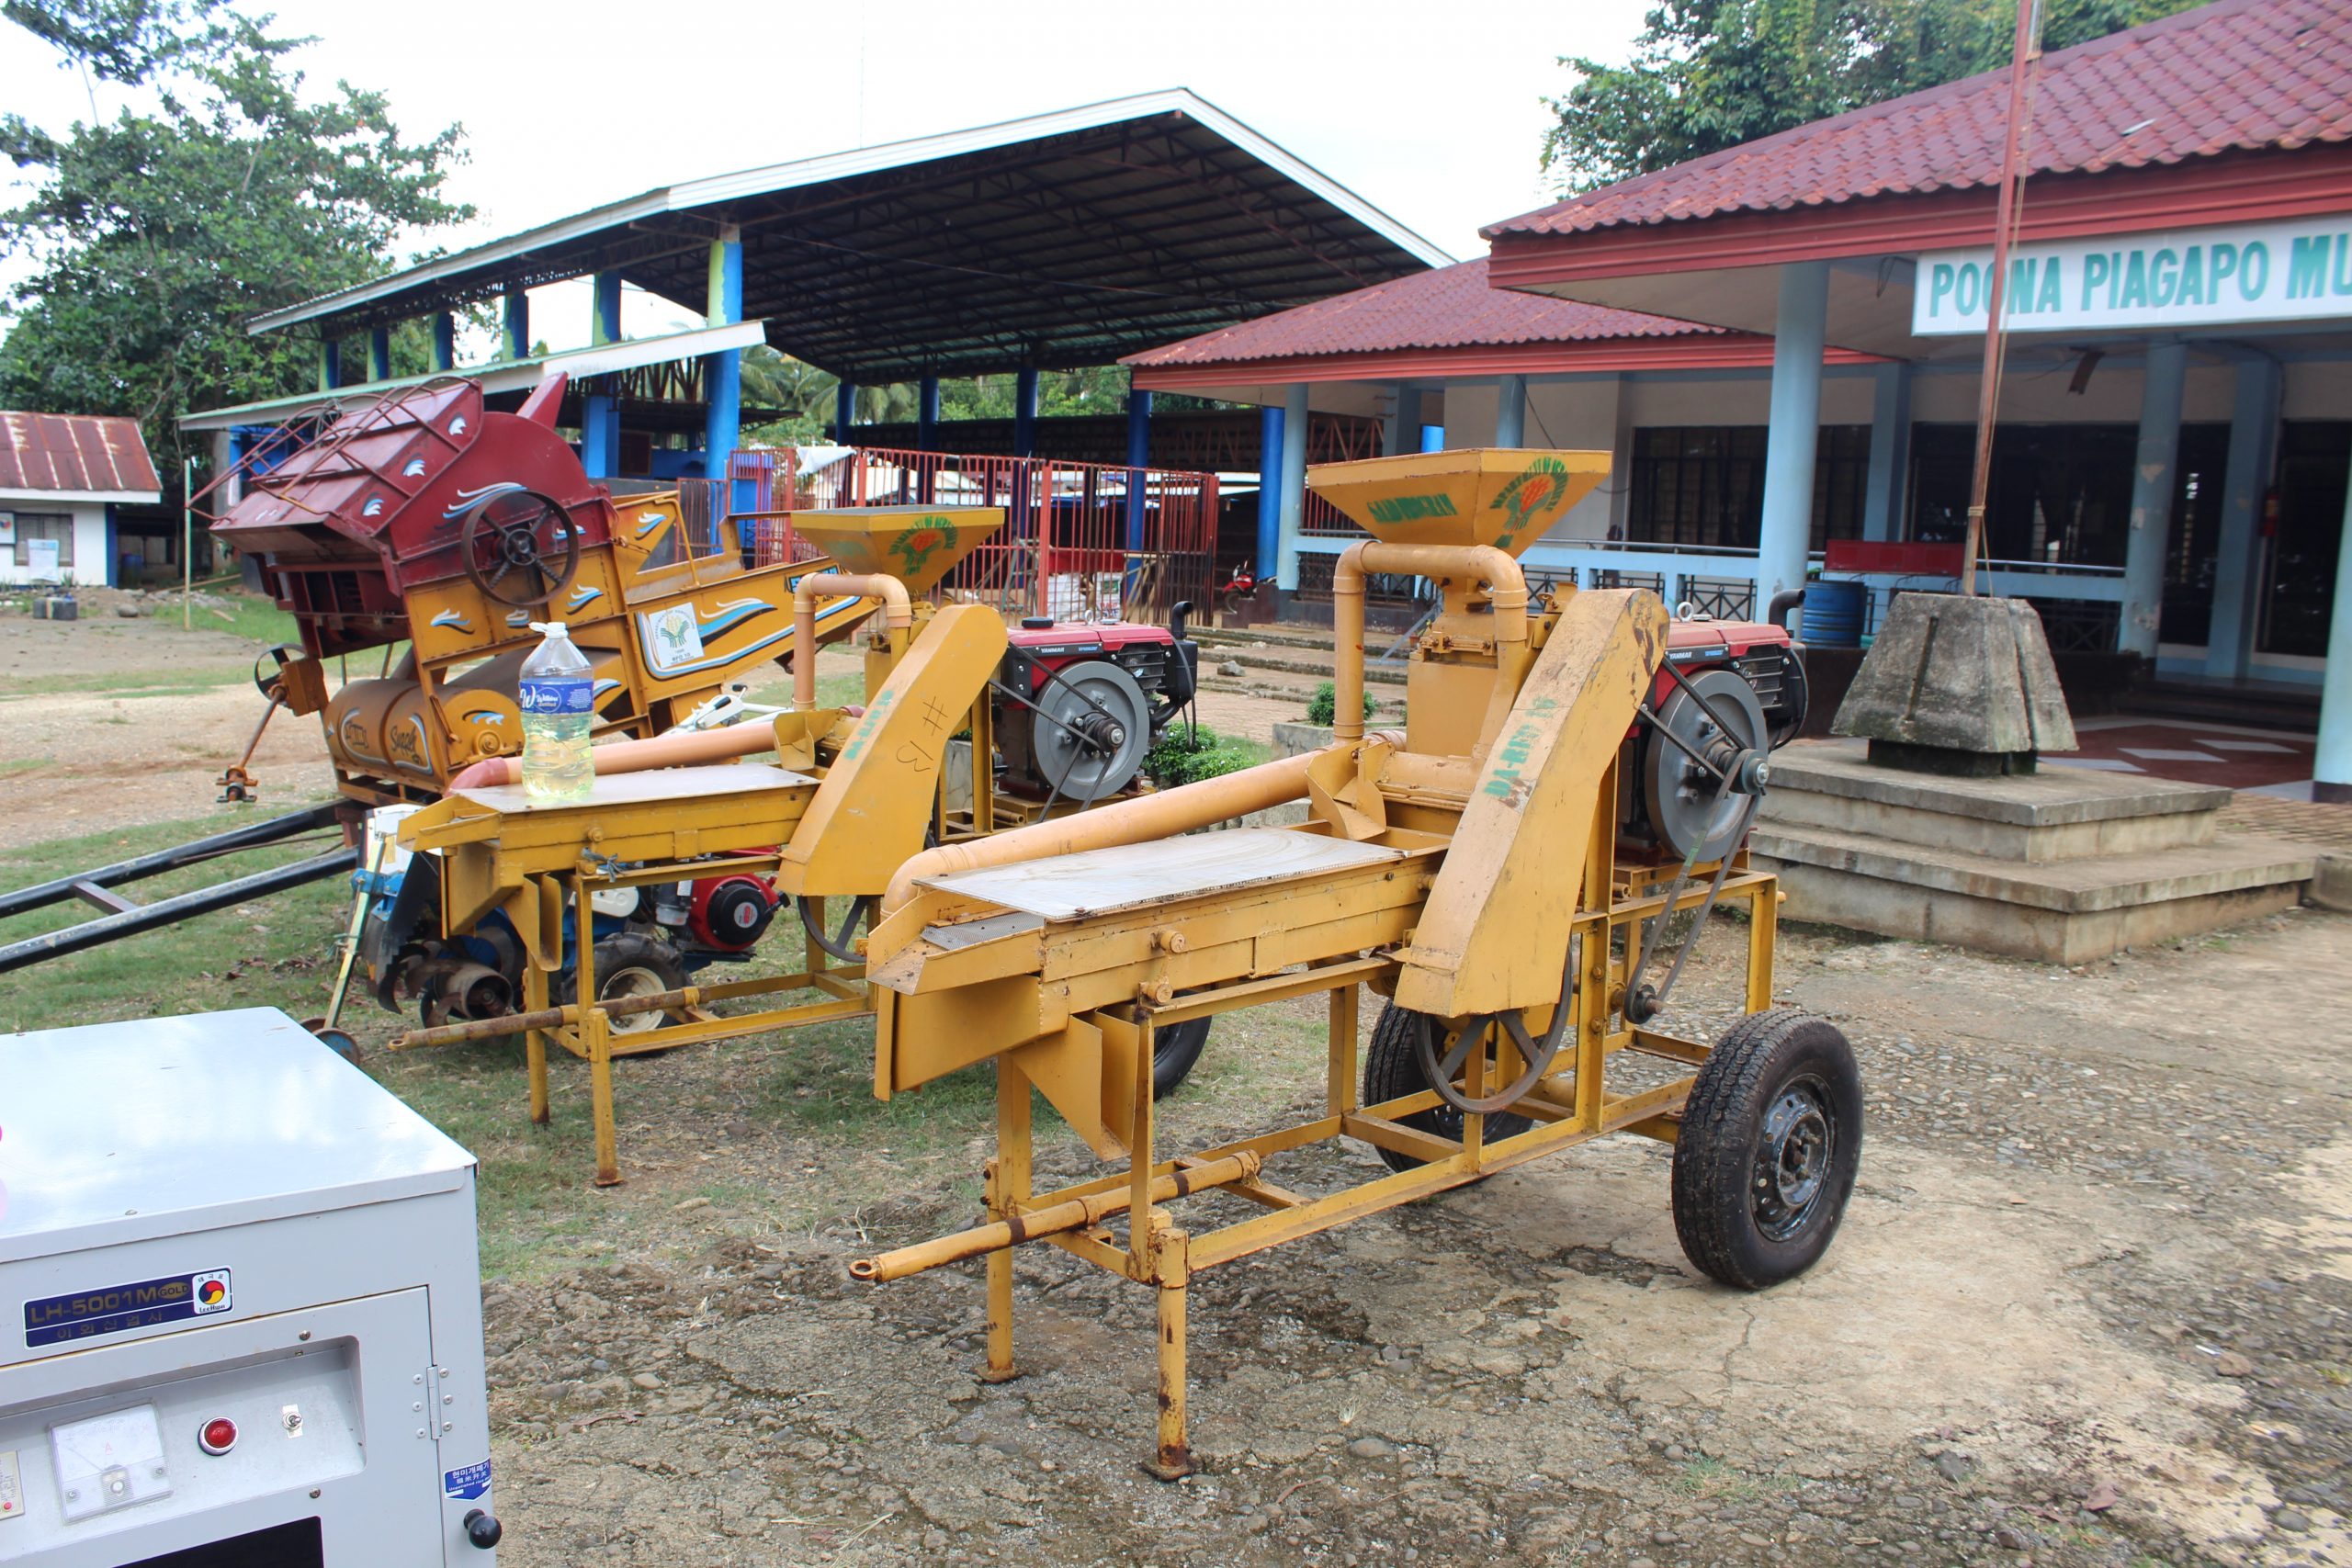 Poona Piagapo farmers receive Php 2.3M worth of farm machinery from DA-SAAD 10